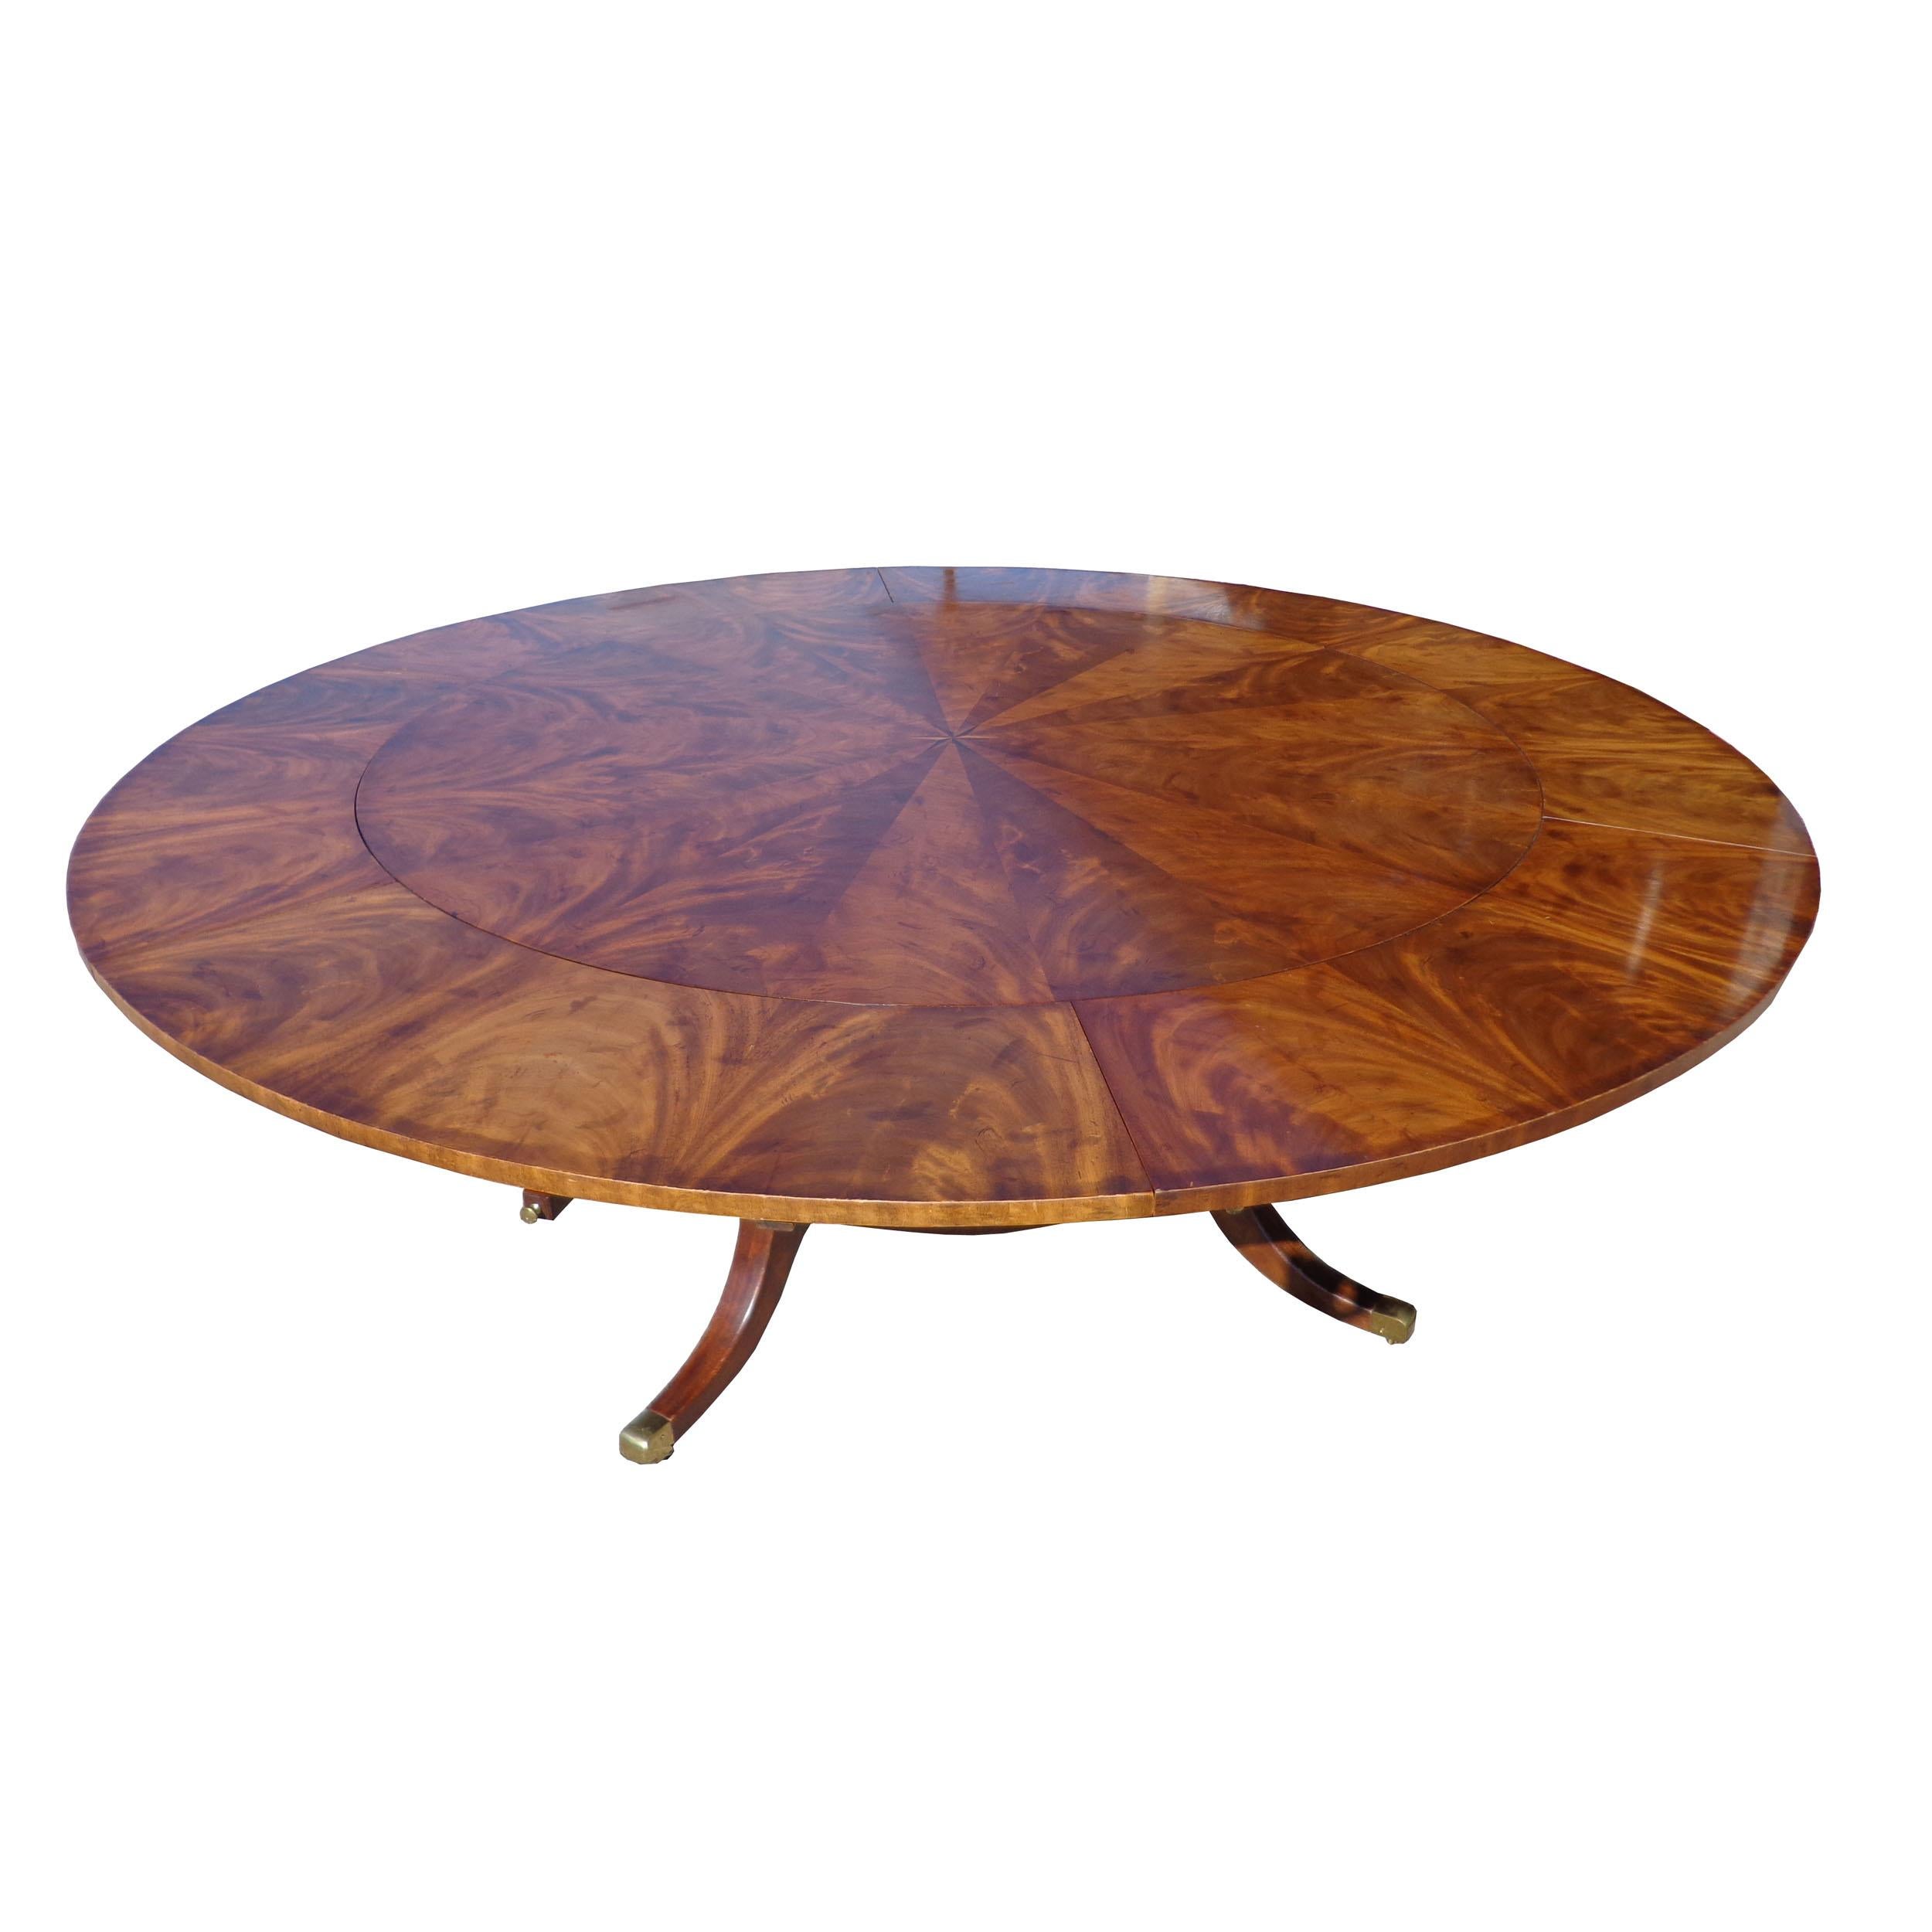 Regency Revival Jupe extendable Burl dining table 

The form of this extraordinary table was invented by Theodore Alexander Robert Jupe in 1835.

Beautiful burl walnut designed in segments consisting of 5 elliptical shaped leaves that are